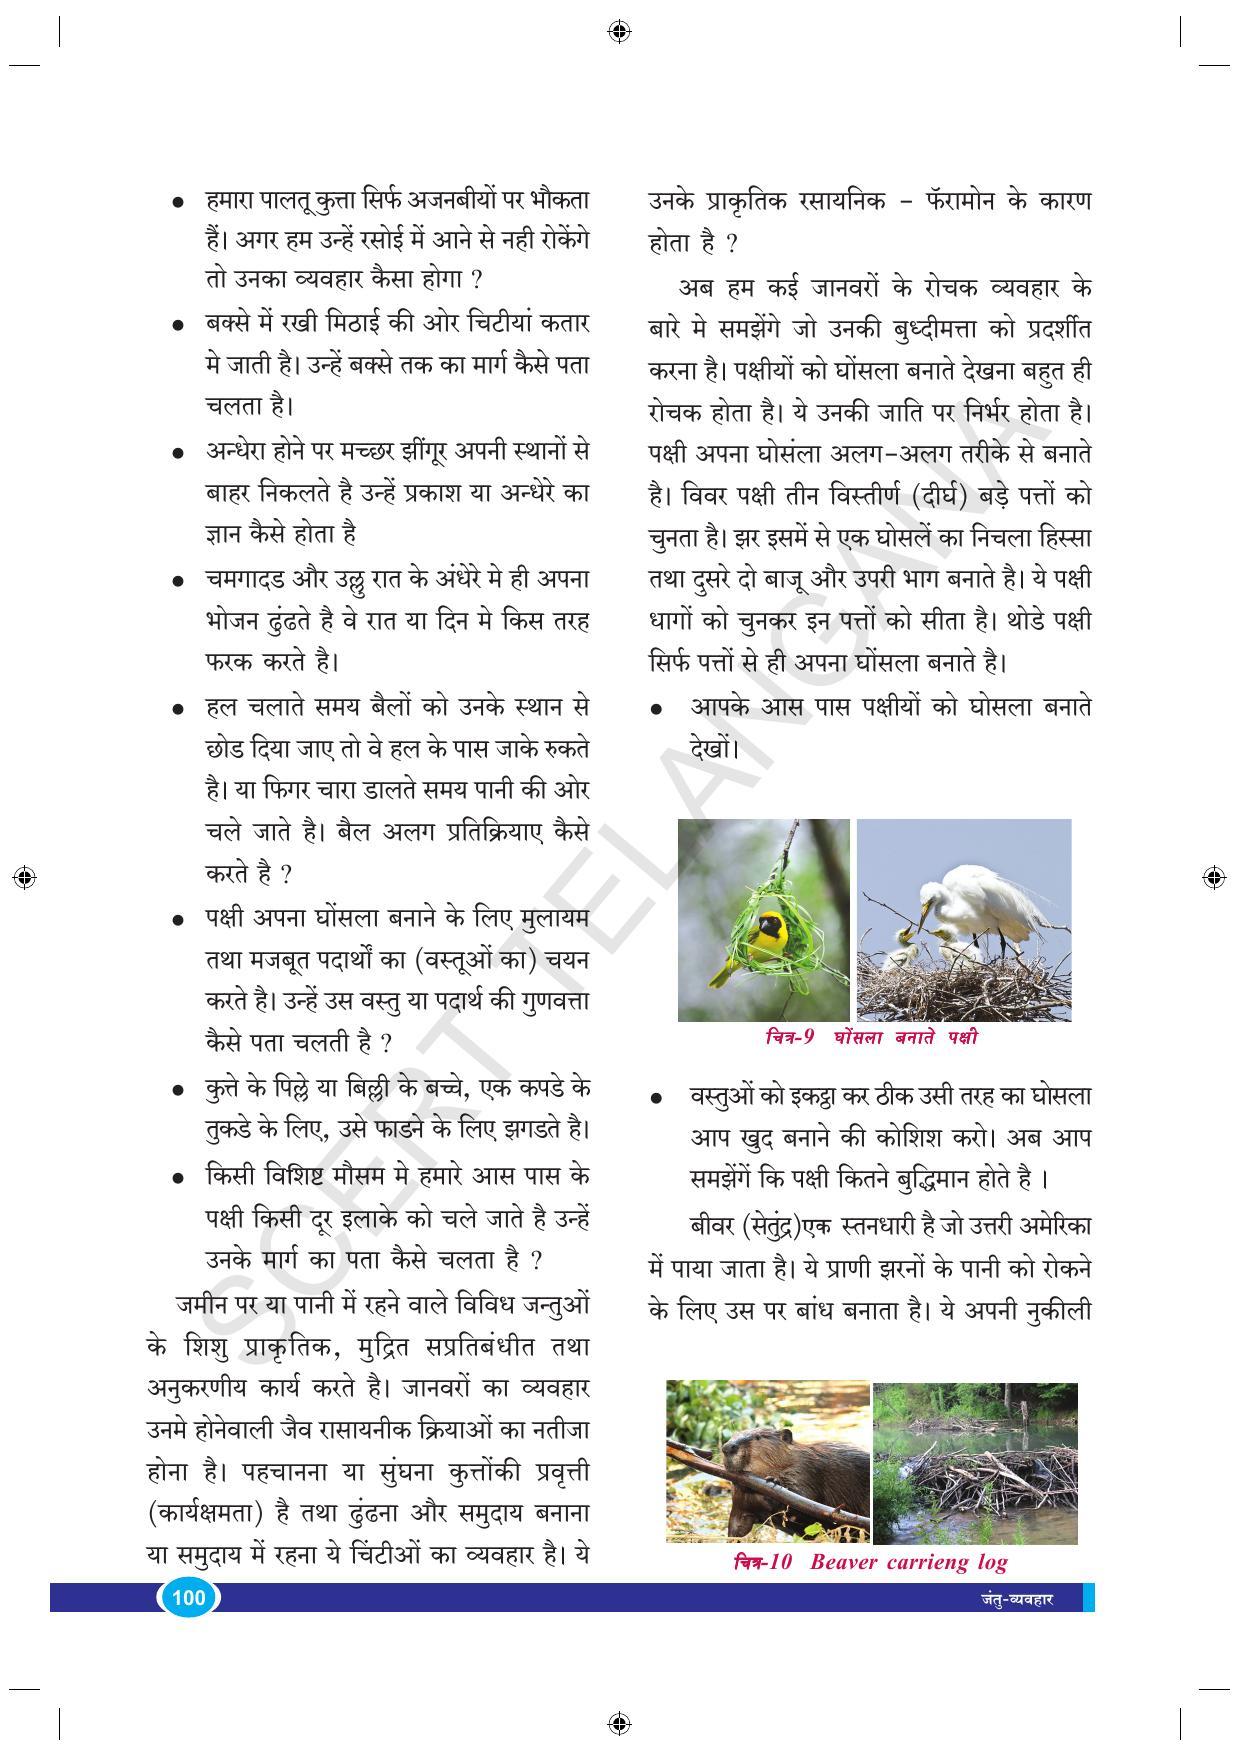 TS SCERT Class 9 Biological Science (Hindi Medium) Text Book - Page 112